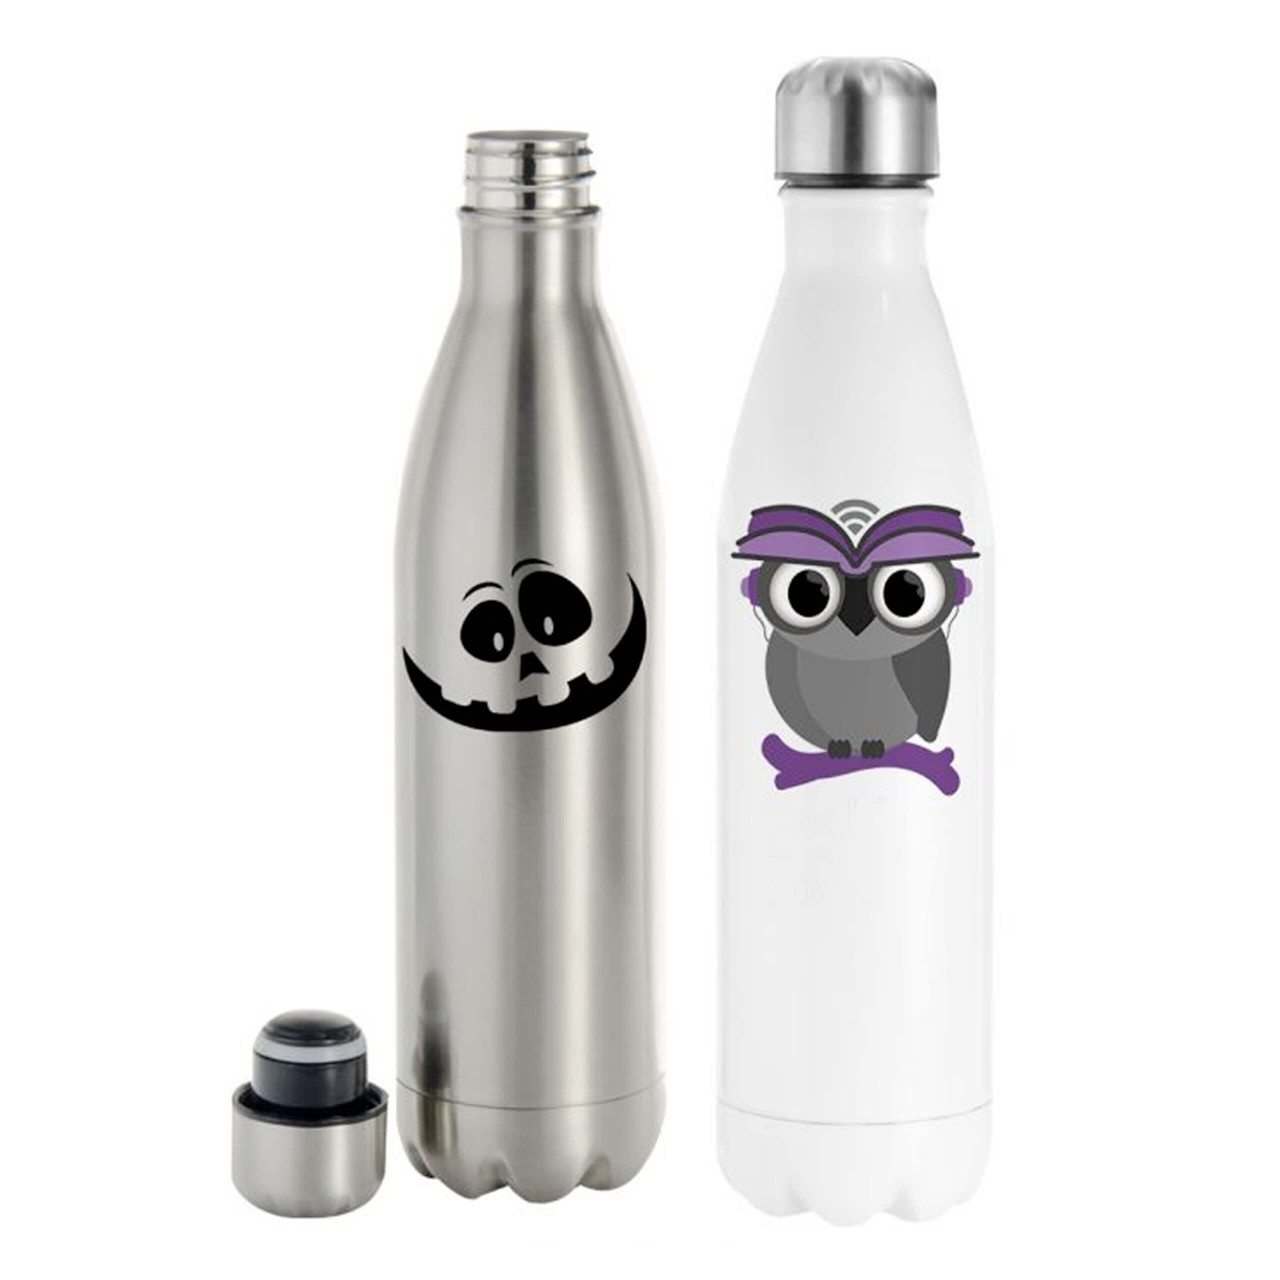 Design Your Own Water Bottle - 17 oz - Stainless Steel - Full Color  Printing